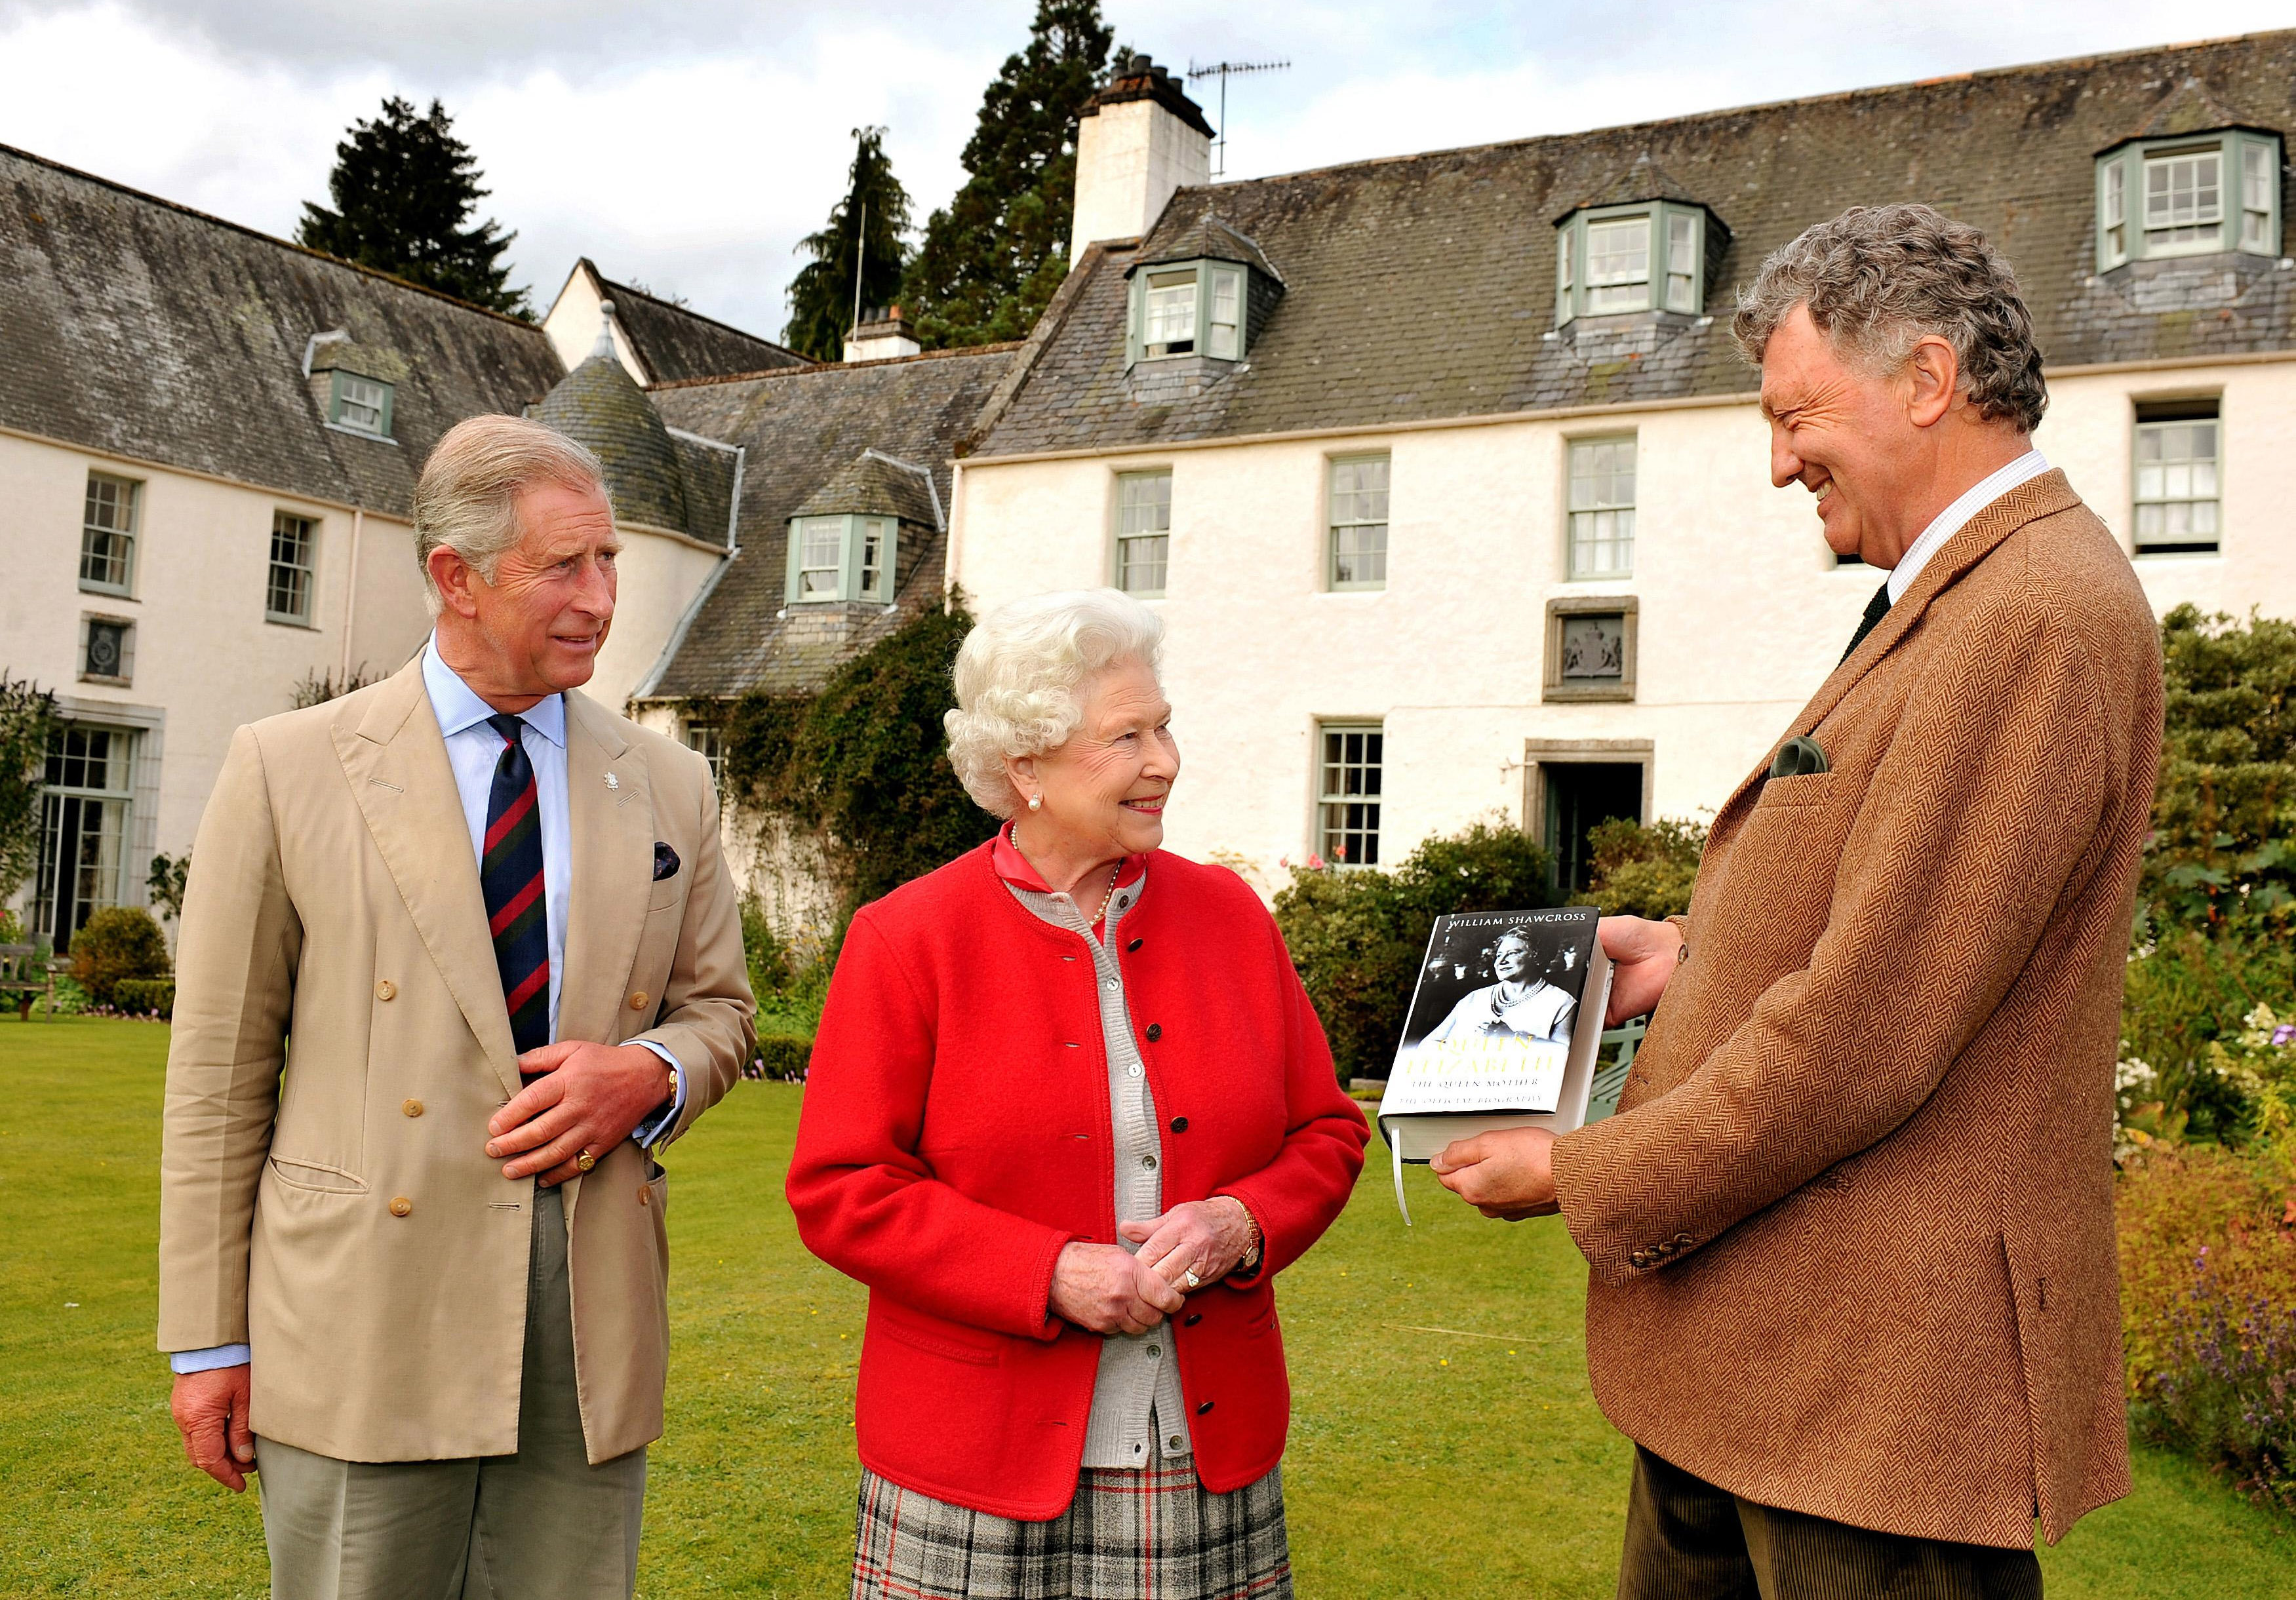 Queen Elizabeth II with then Prince Charles in the garden at Birkhall on September 2, 2009, Balmoral Estate, Scotland. | Source: Getty Images